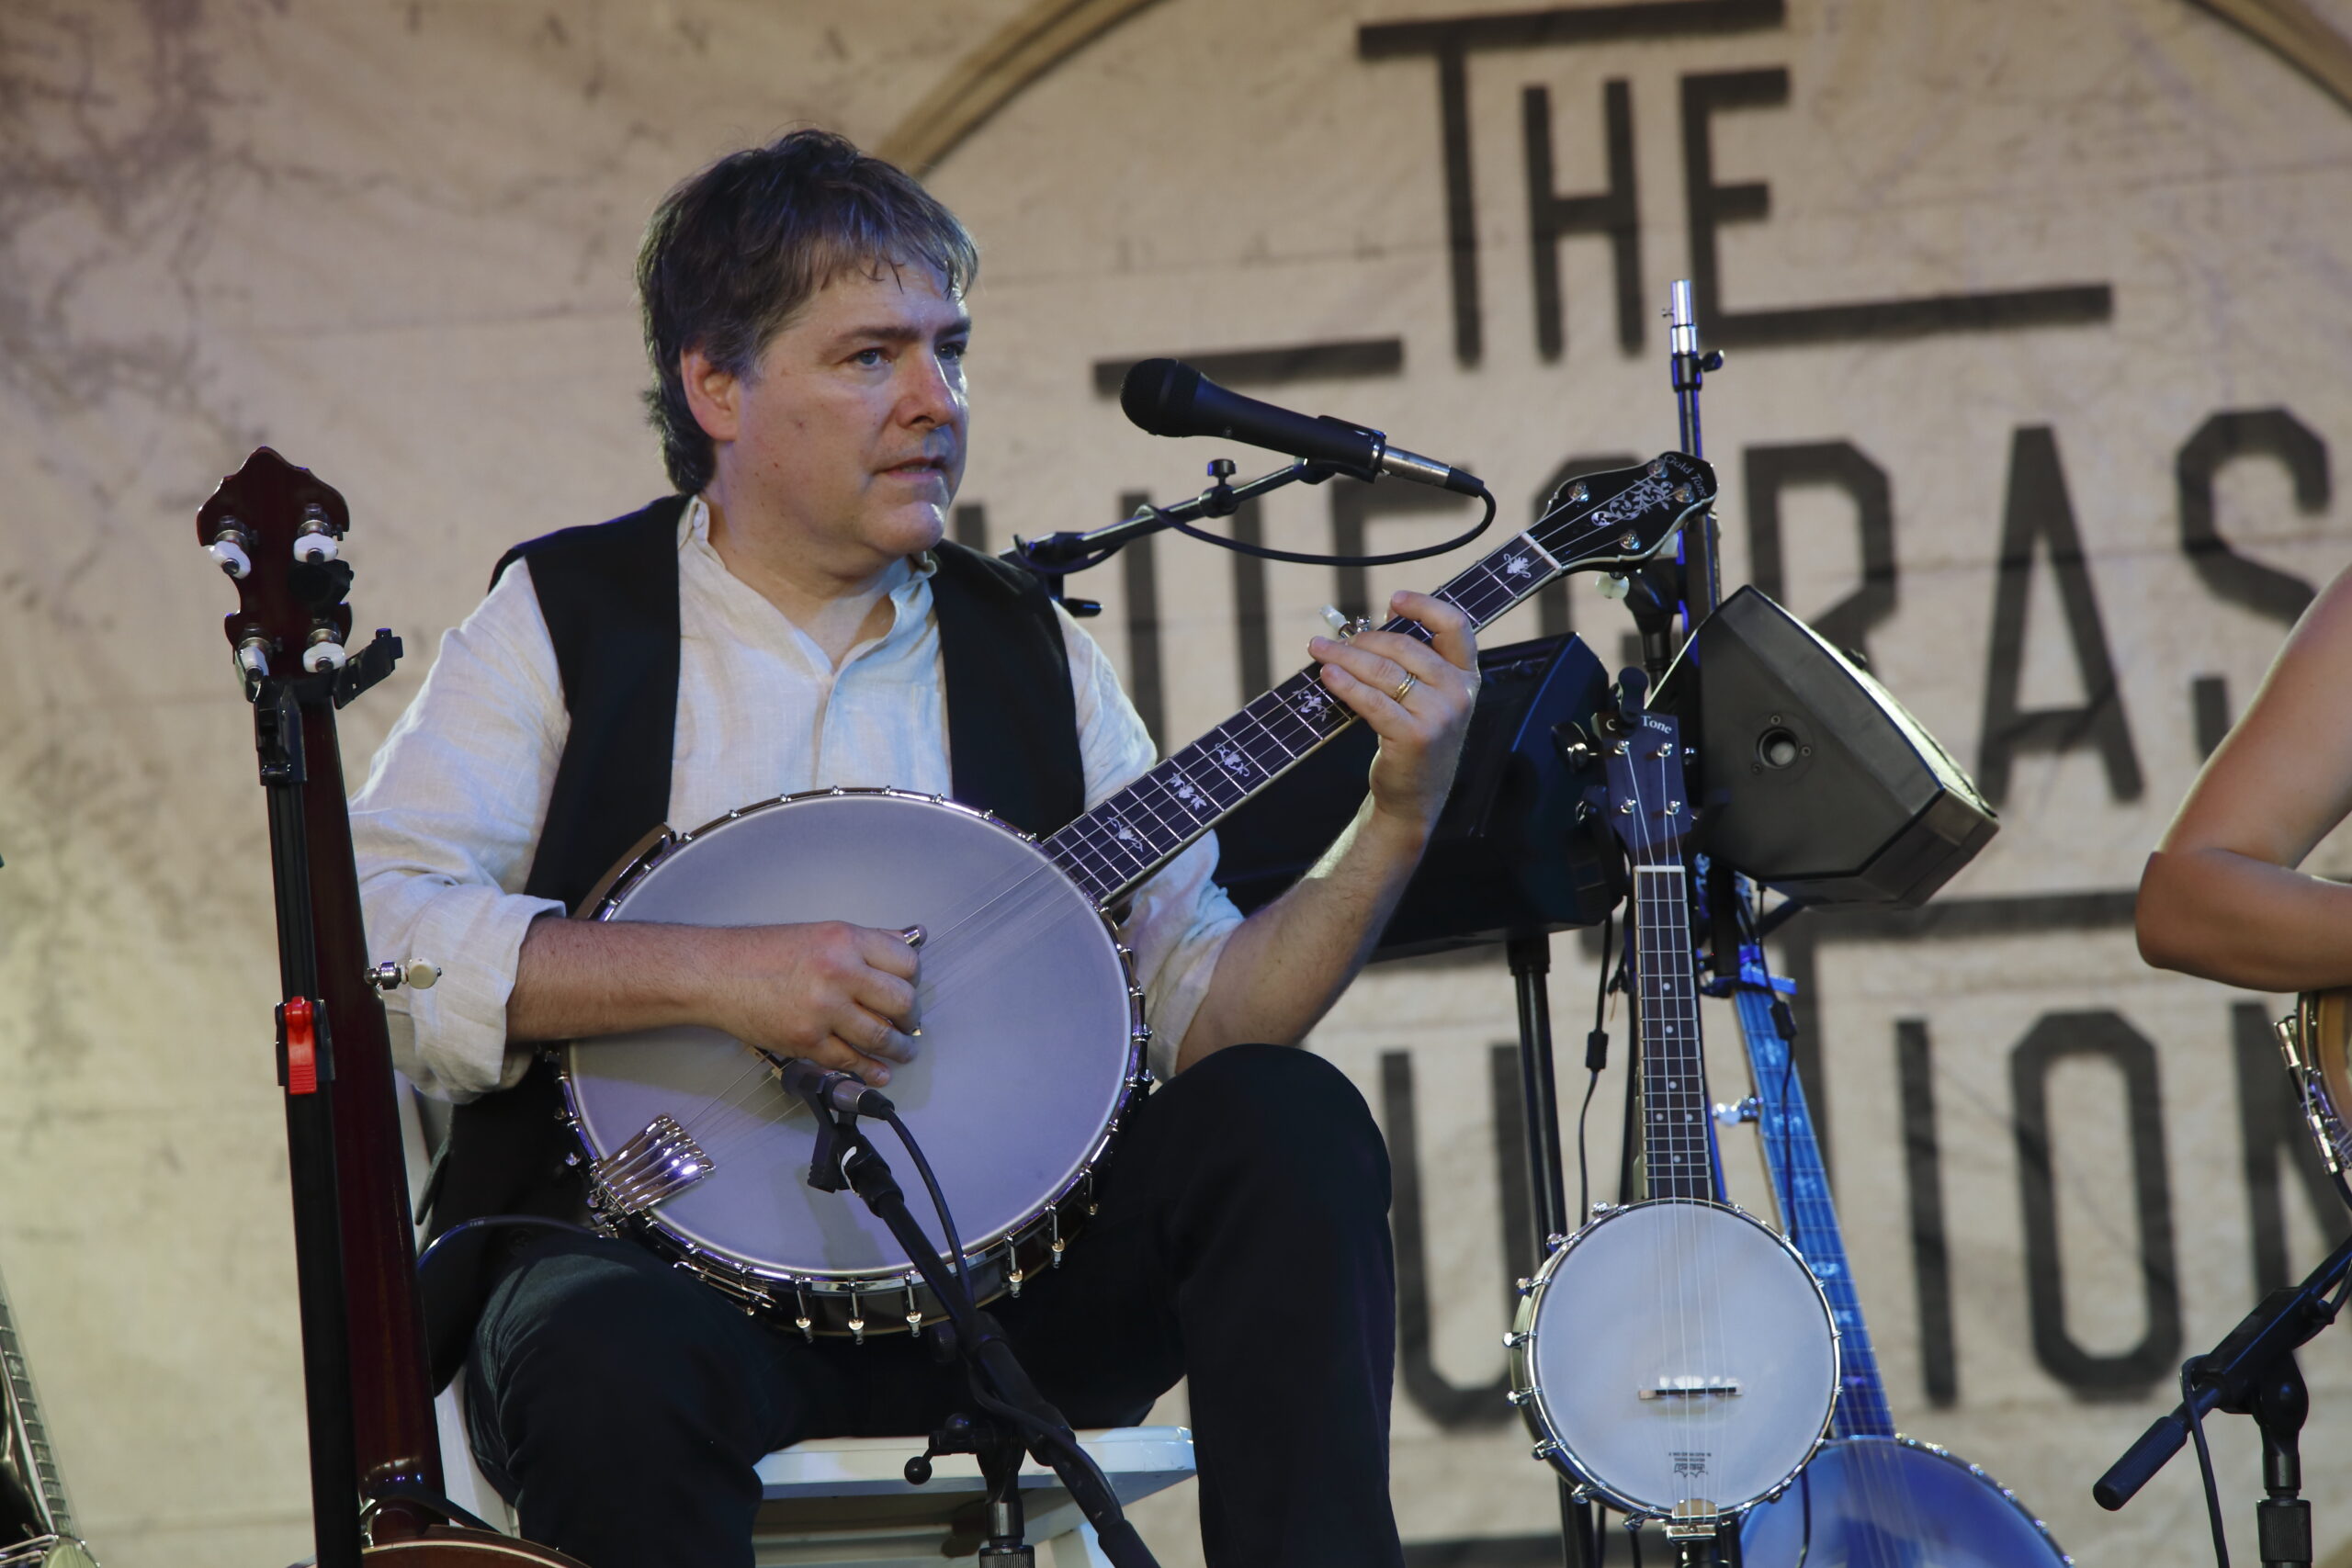 Bela Fleck performs at the 2015 Bonnaroo Music and Arts Festival on Sunday, June 14, 2015, in Manchester, Tennessee. (Photo by John Davisson/Invision/AP)